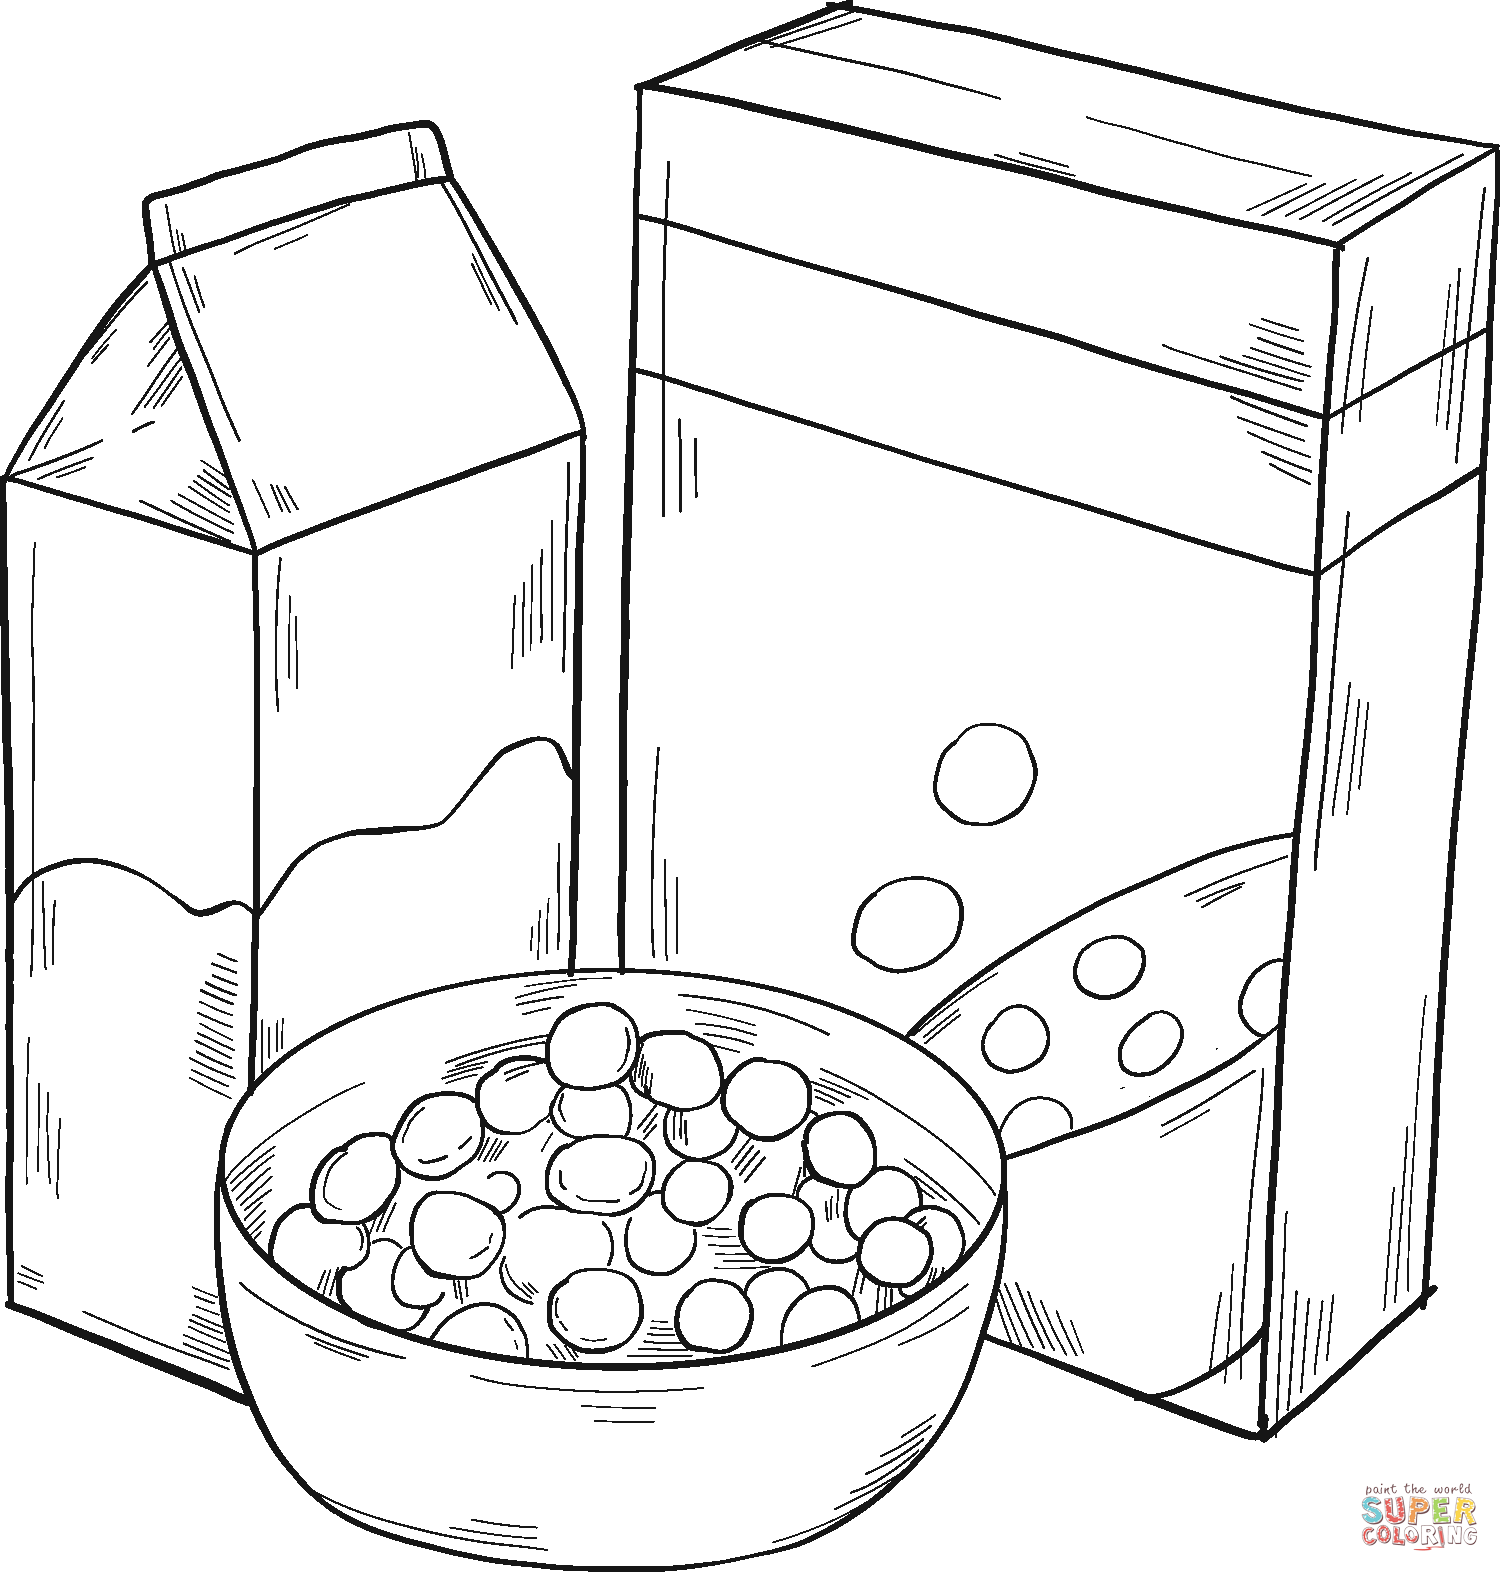 Cereal Boxes and Bowl coloring page | Free Printable Coloring Pages